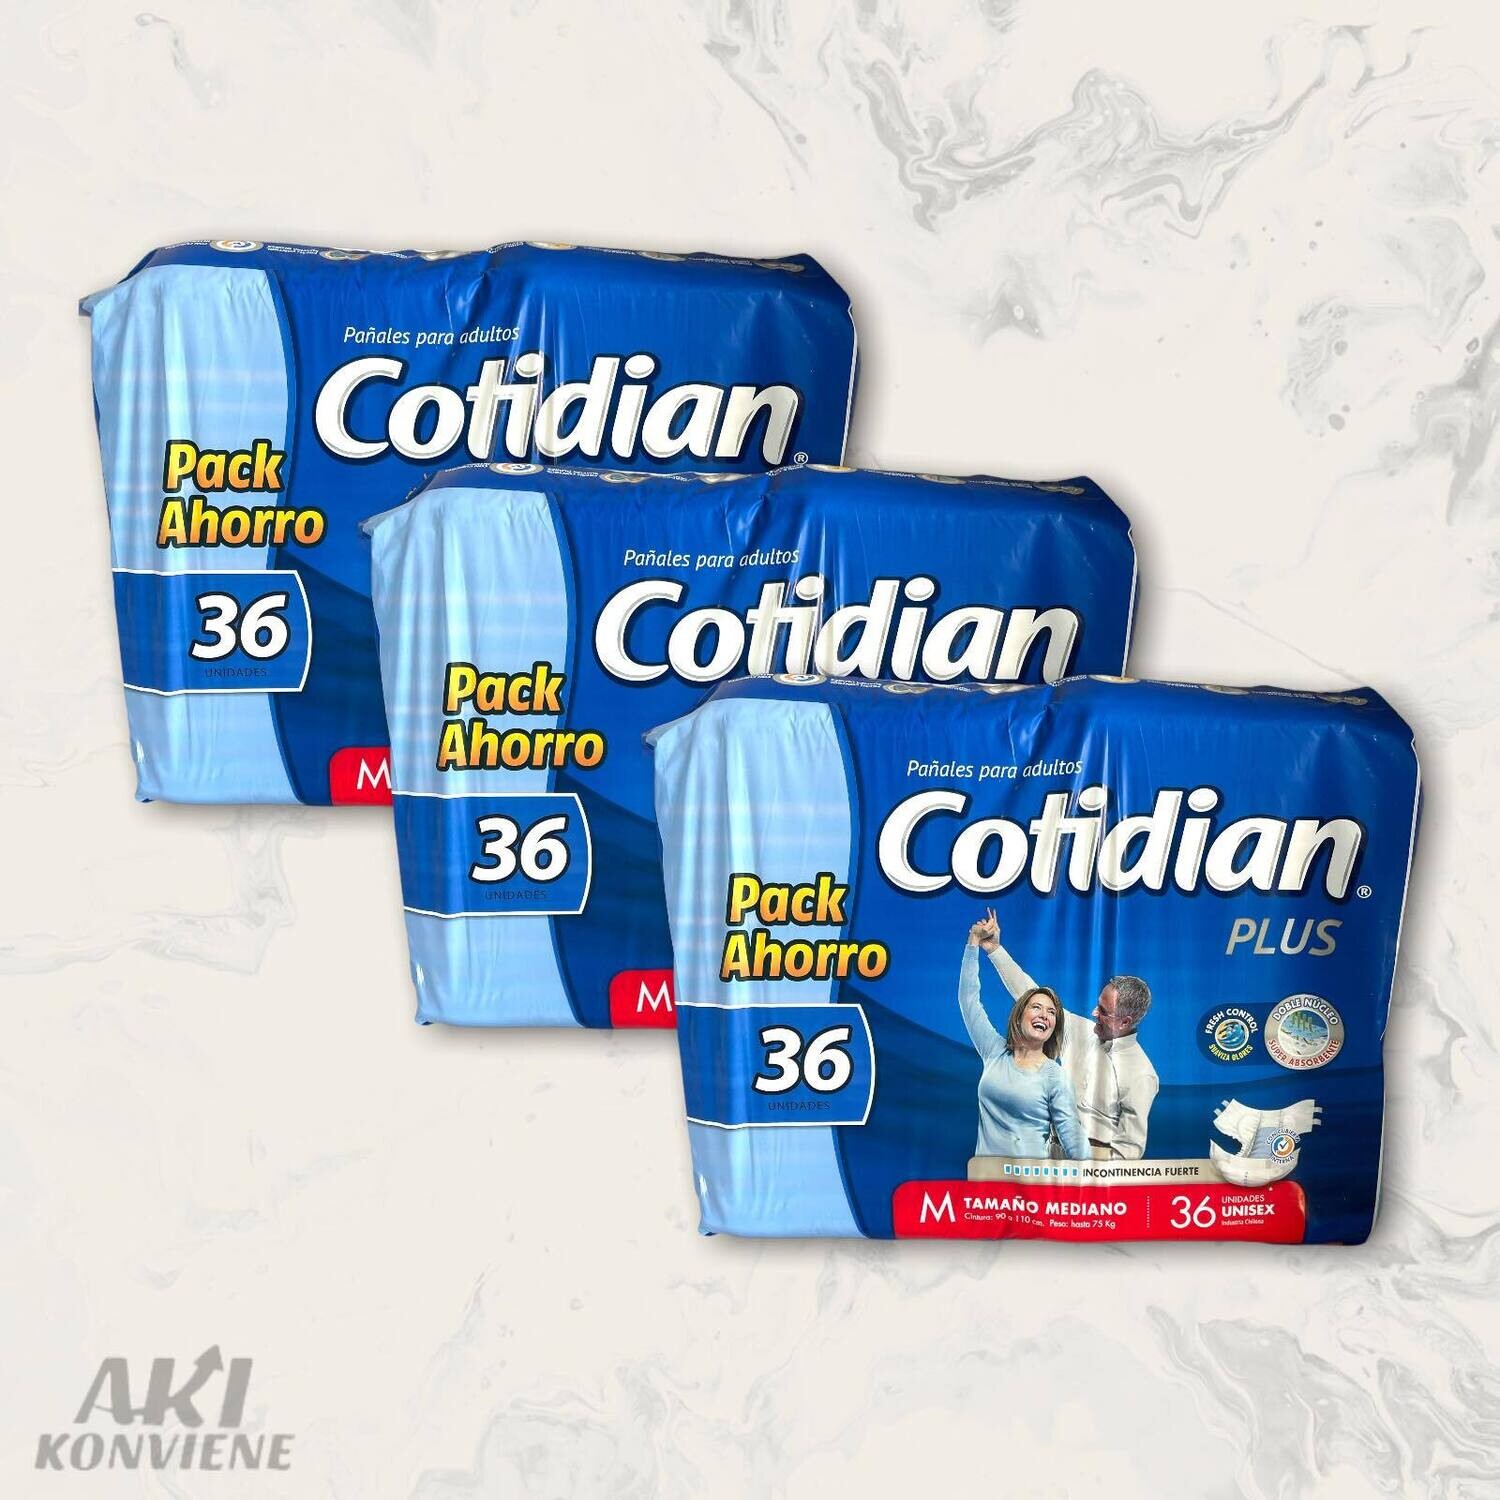 PAÑAL ADULTO COTIDIAN PLUS MED BOL 36 UND